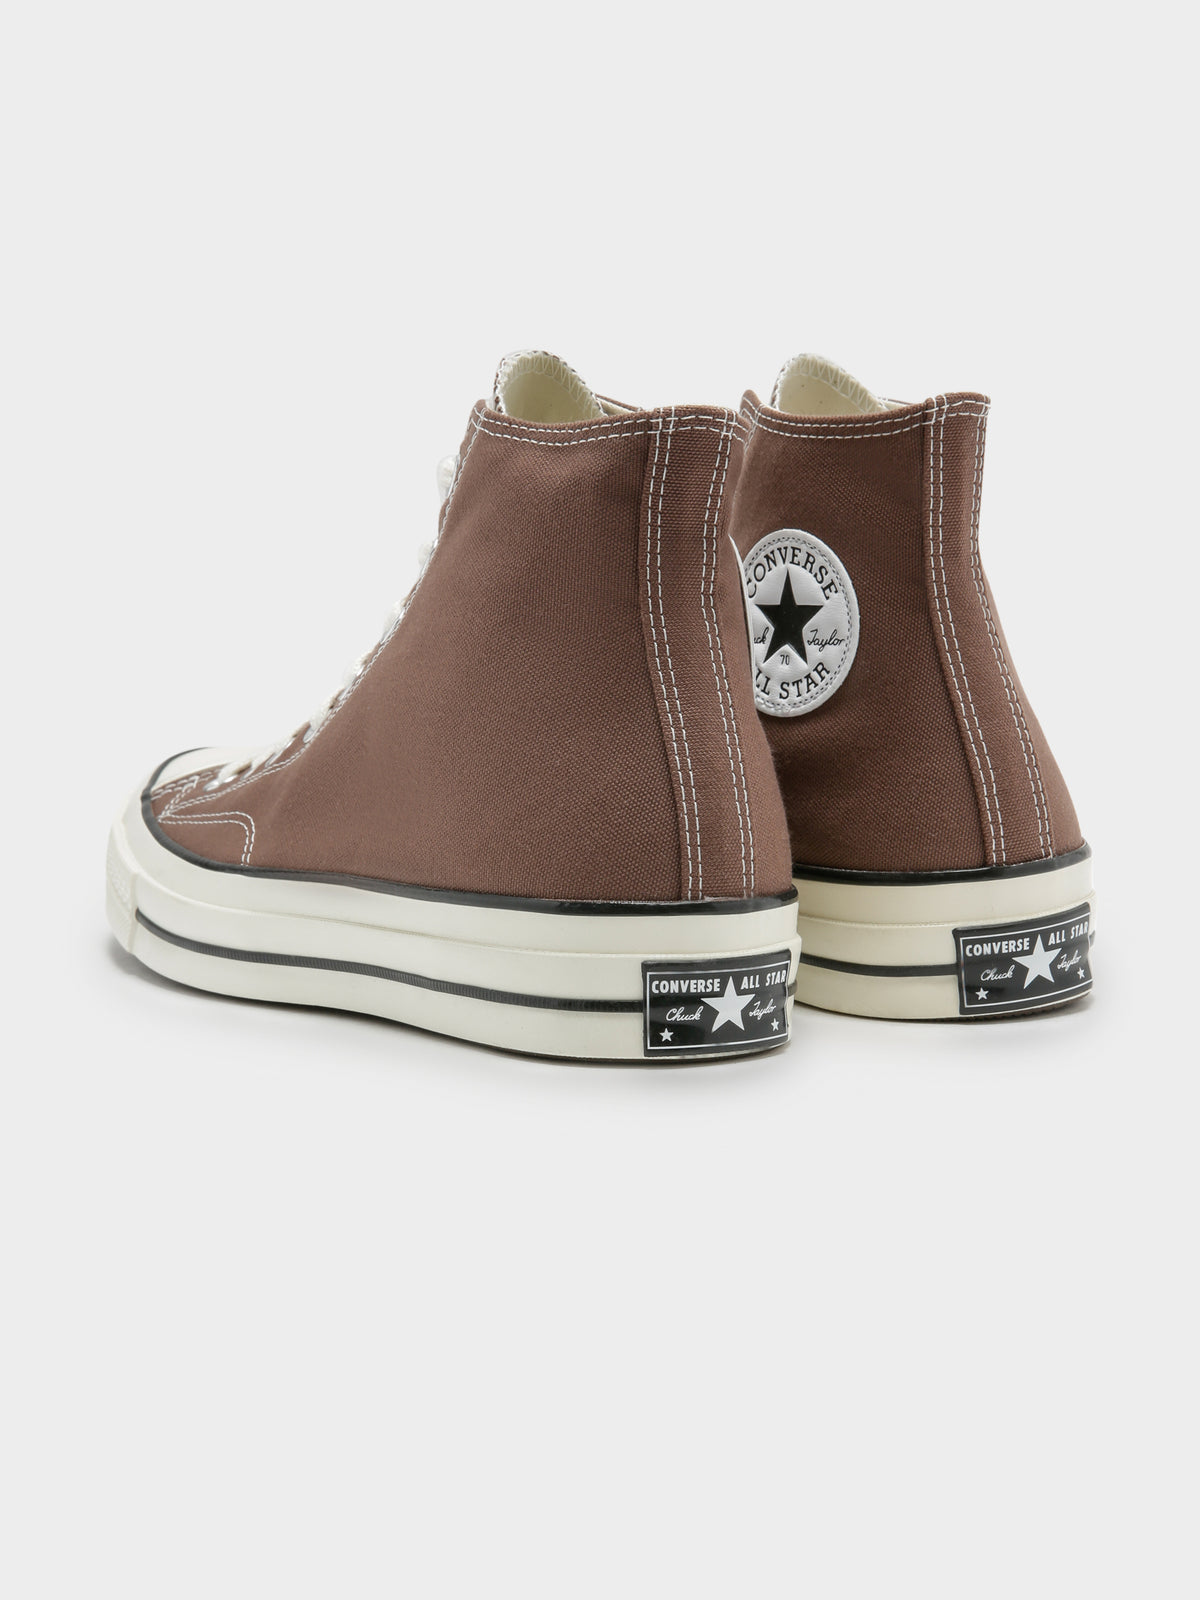 Unisex Chuck 70 High Sneakers in Squirrel Friend